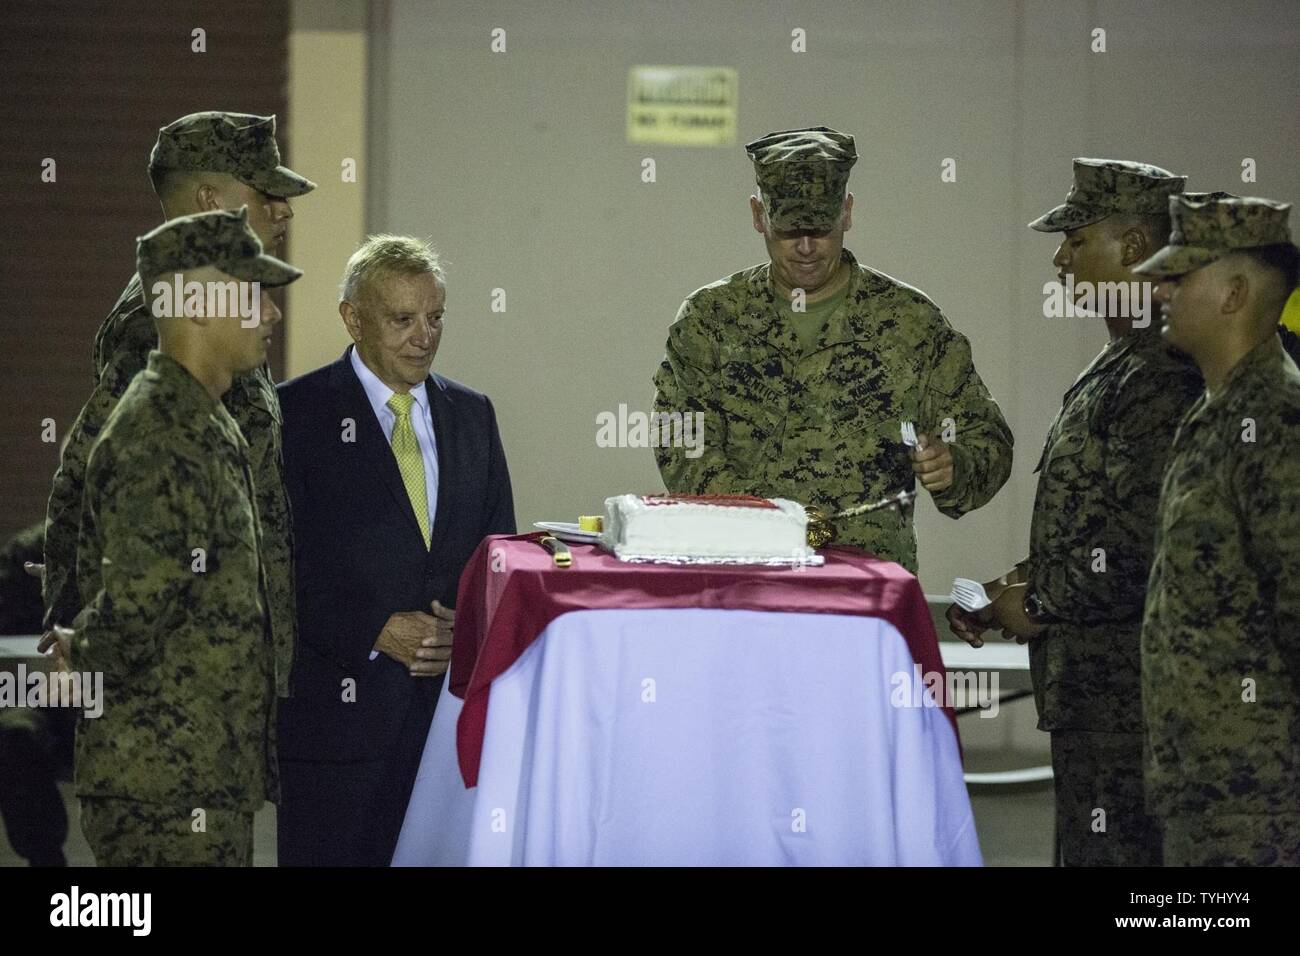 U.S. Marine veteran Patrick Timothy Brent, left, guest of honor, and Col. Thomas Prentice, commanding officer for Special Purpose Marine Air-Ground Task Force - Southern Command, cut the ceremonial cake during the celebration of the 241st Marine Corps Birthday Ball aboard Soto Cano Air Base, Honduras, Nov. 10, 2016. The celebration honors those past, present, and future Marines throughout history and marks the 241st Marine Corps Birthday since its founding on Nov. 10, 1775. Stock Photo